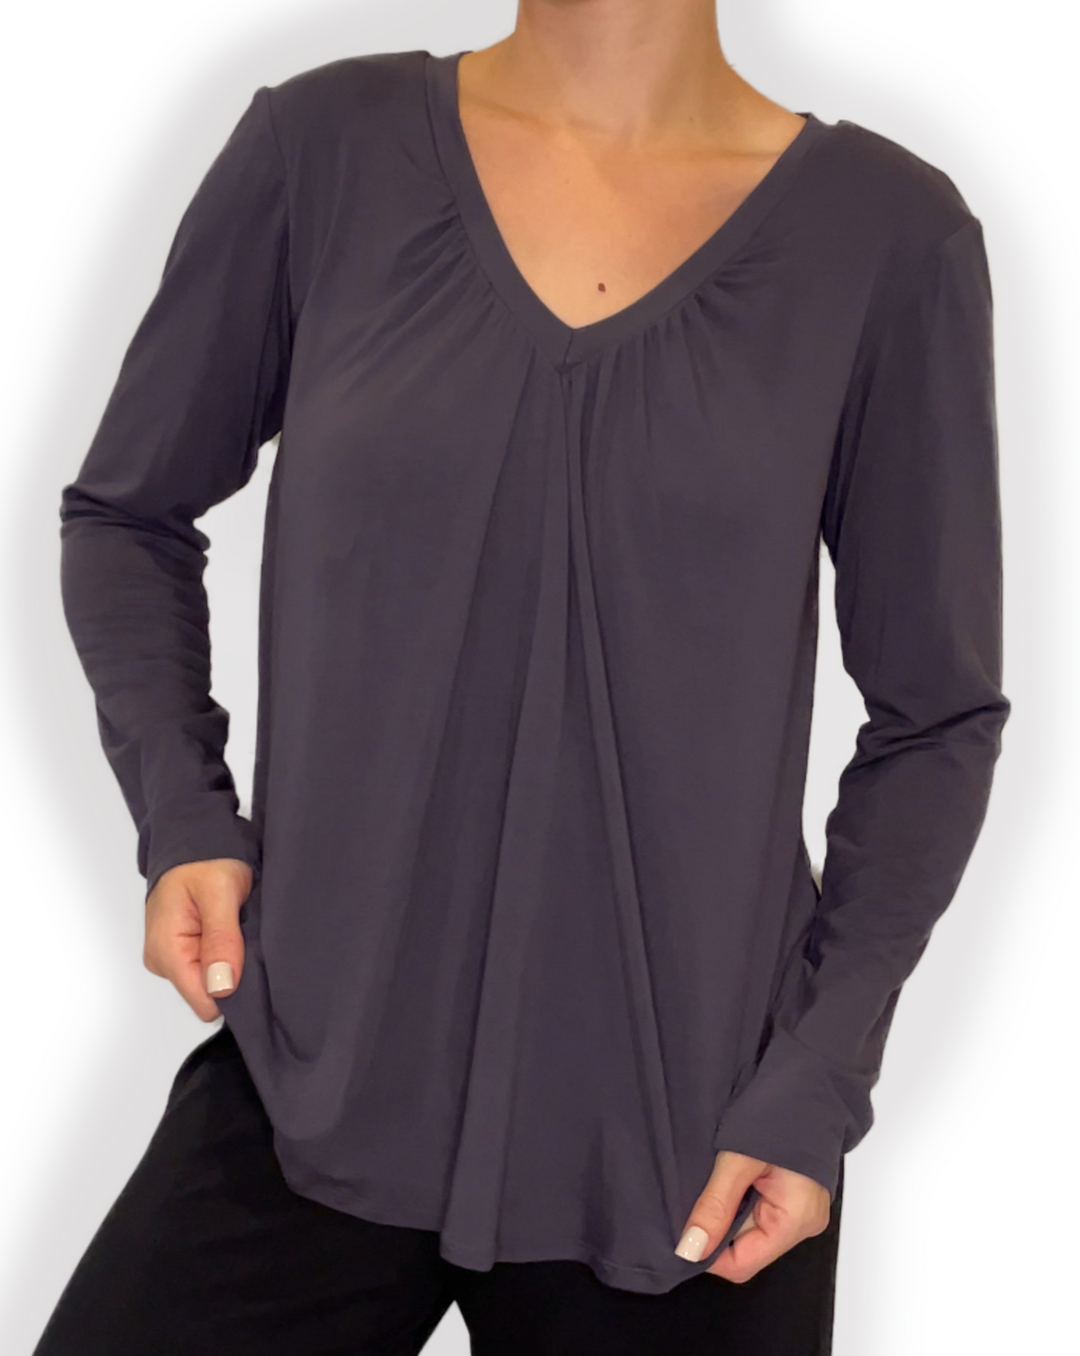 Collection DARCI of Bamboo Long Sleeve Tops in dusty navy color 